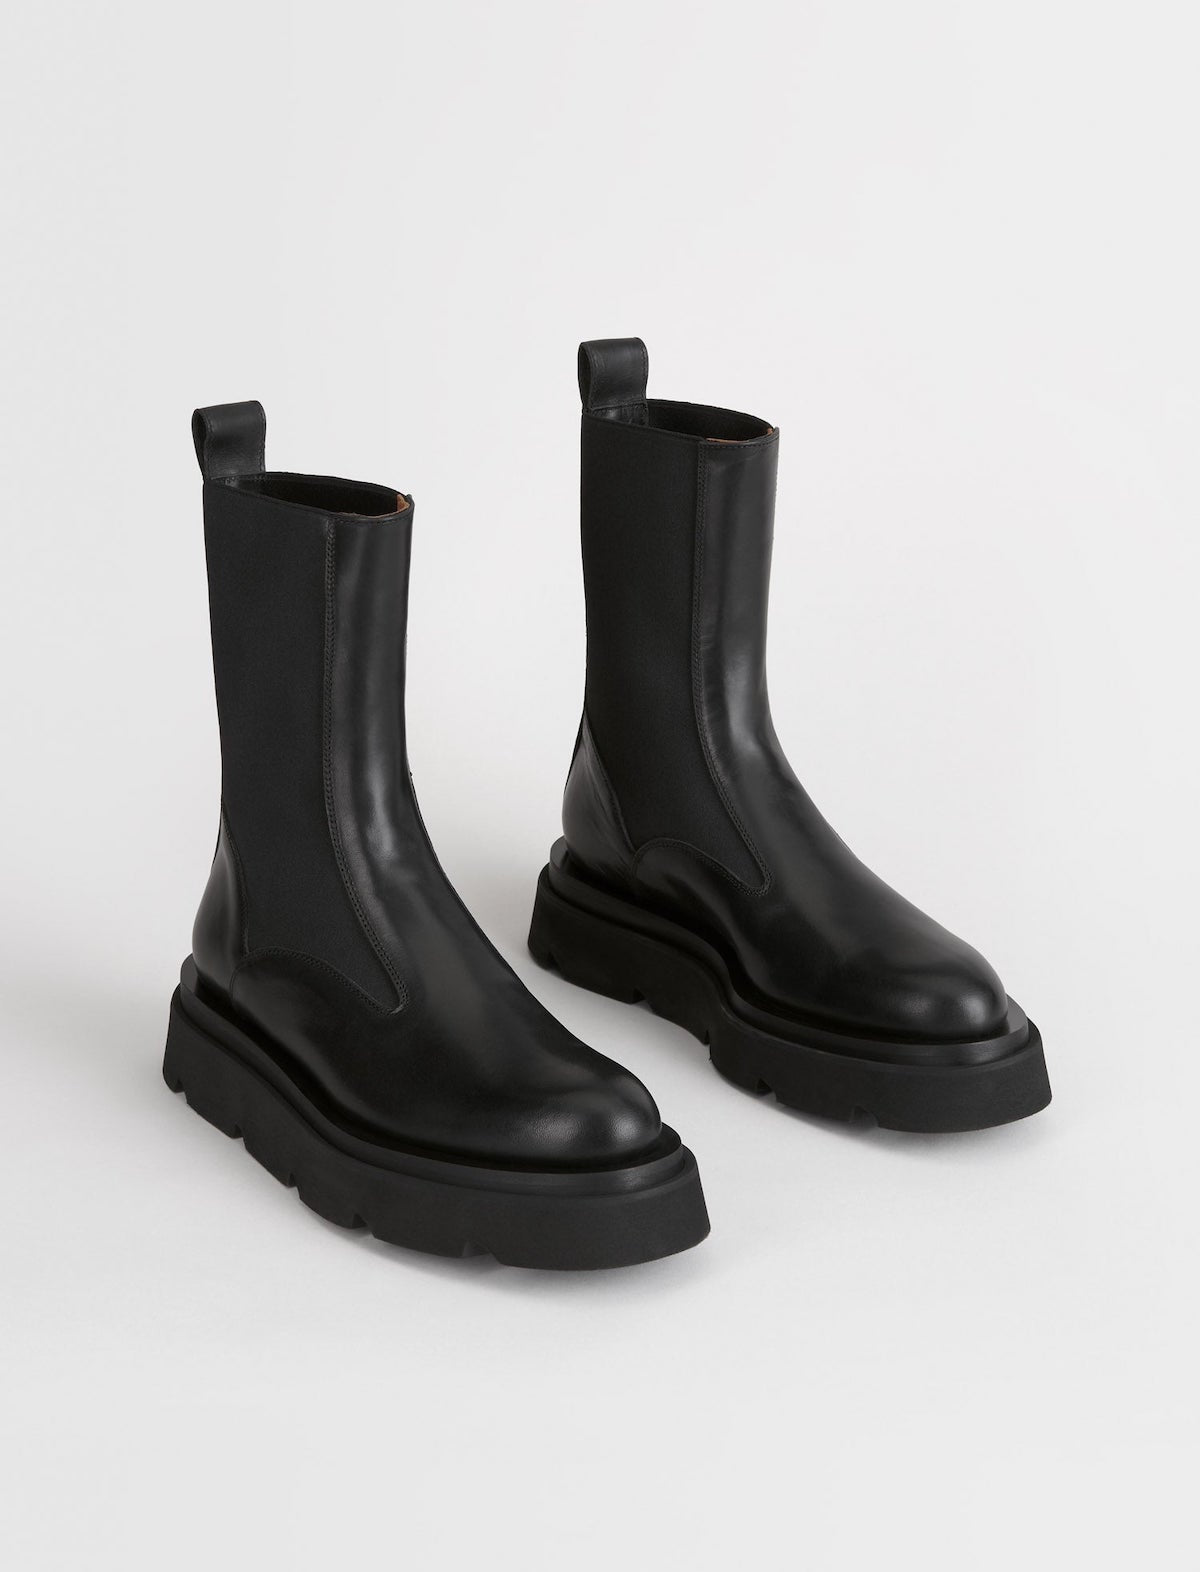 ATP Atelier Moncalieri Chunky Vacchetta Leather Boots in Black